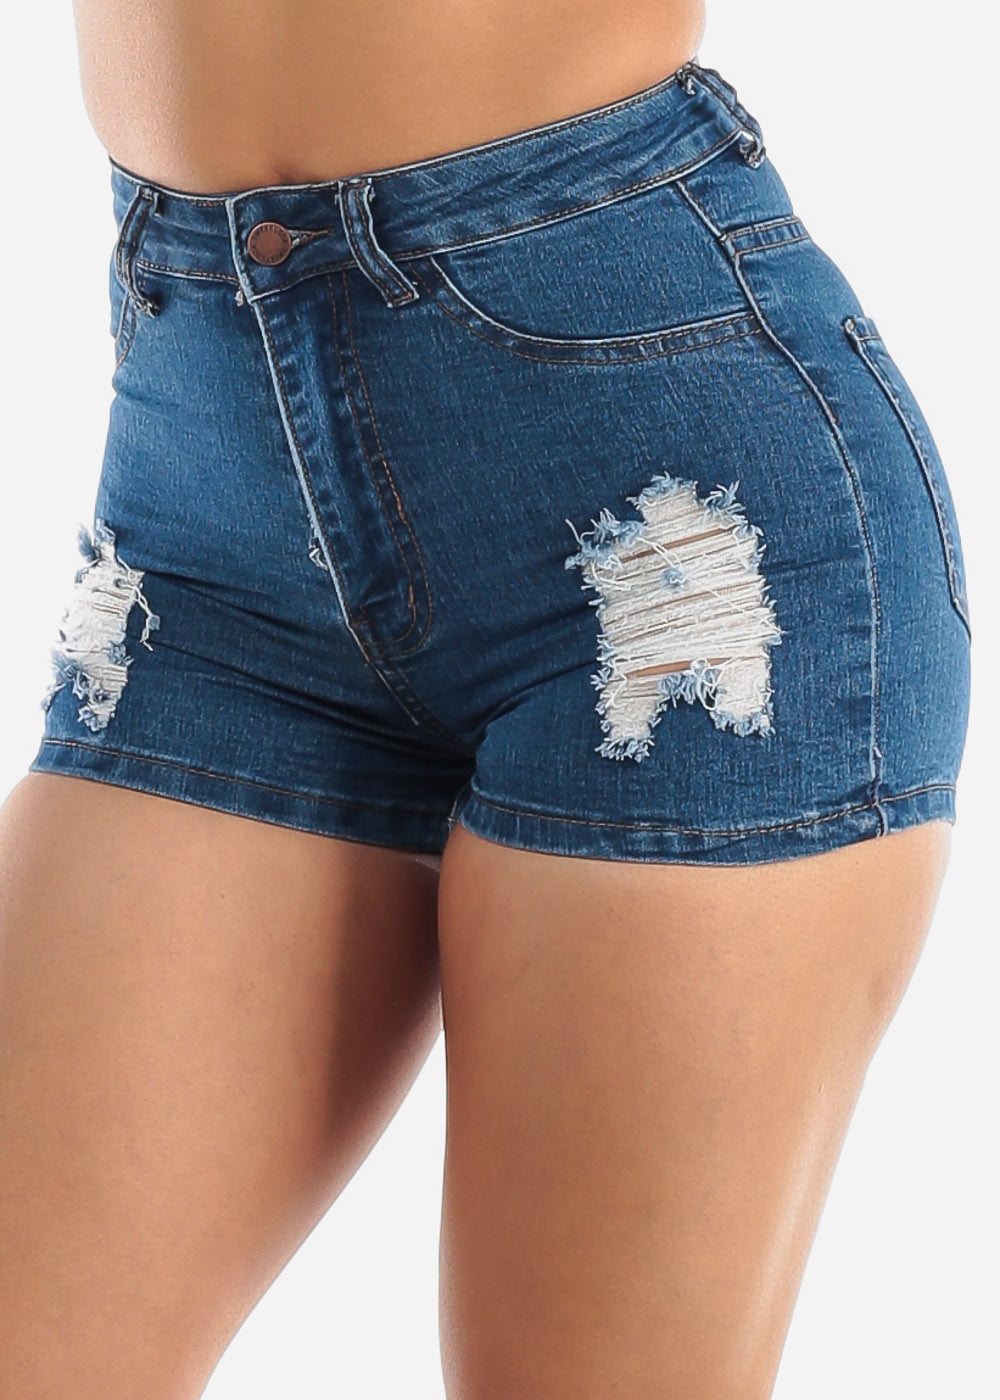 high waisted ripped jeans shorts